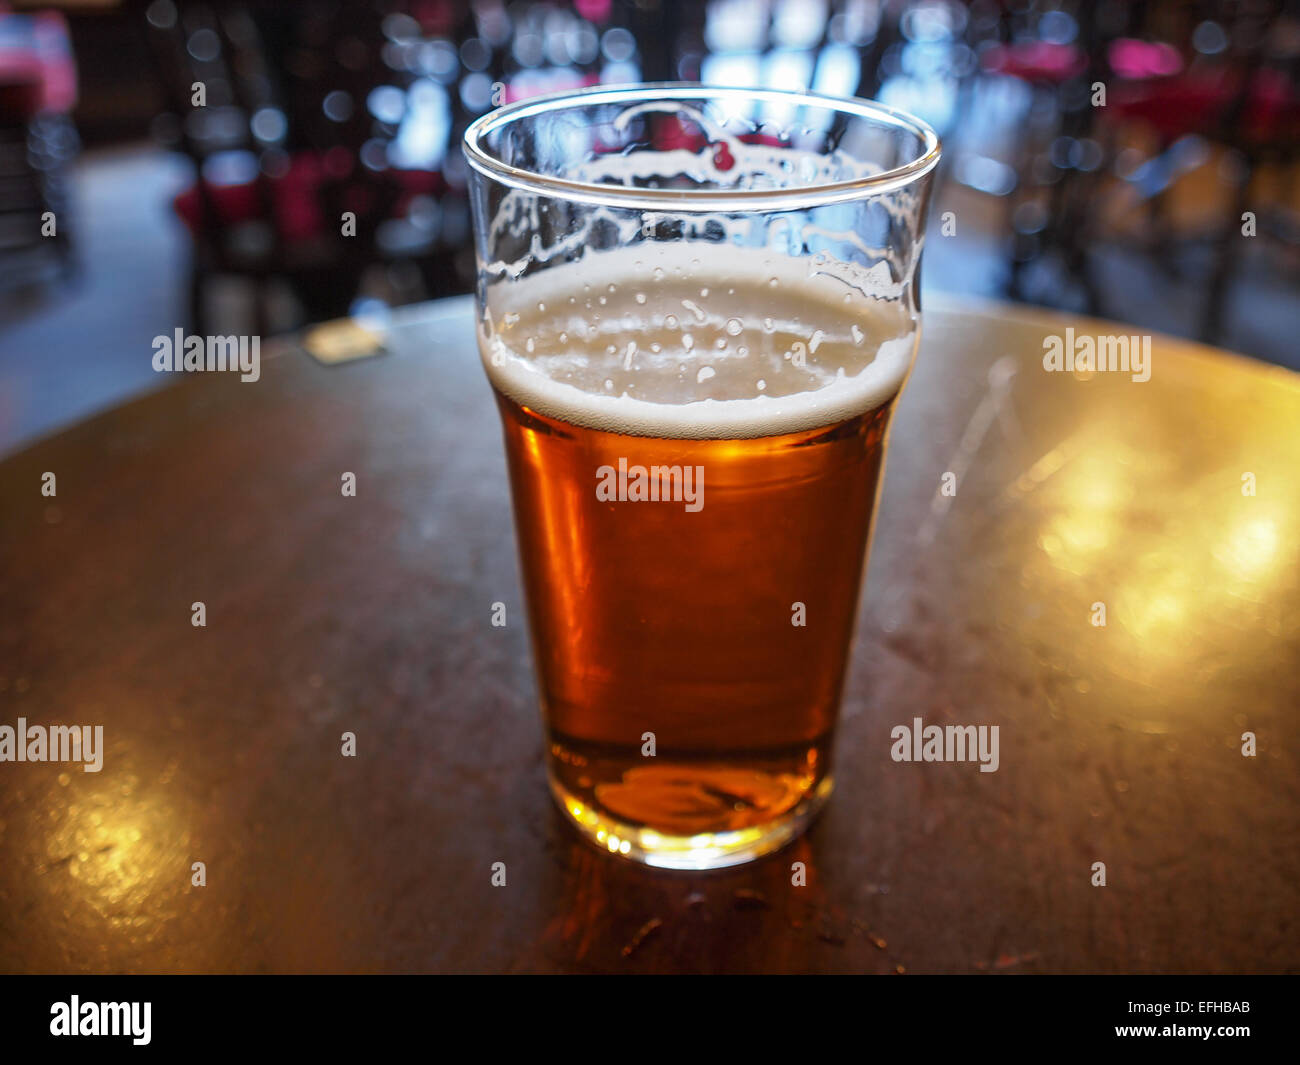 Pint of British bitter ale beer Stock Photo